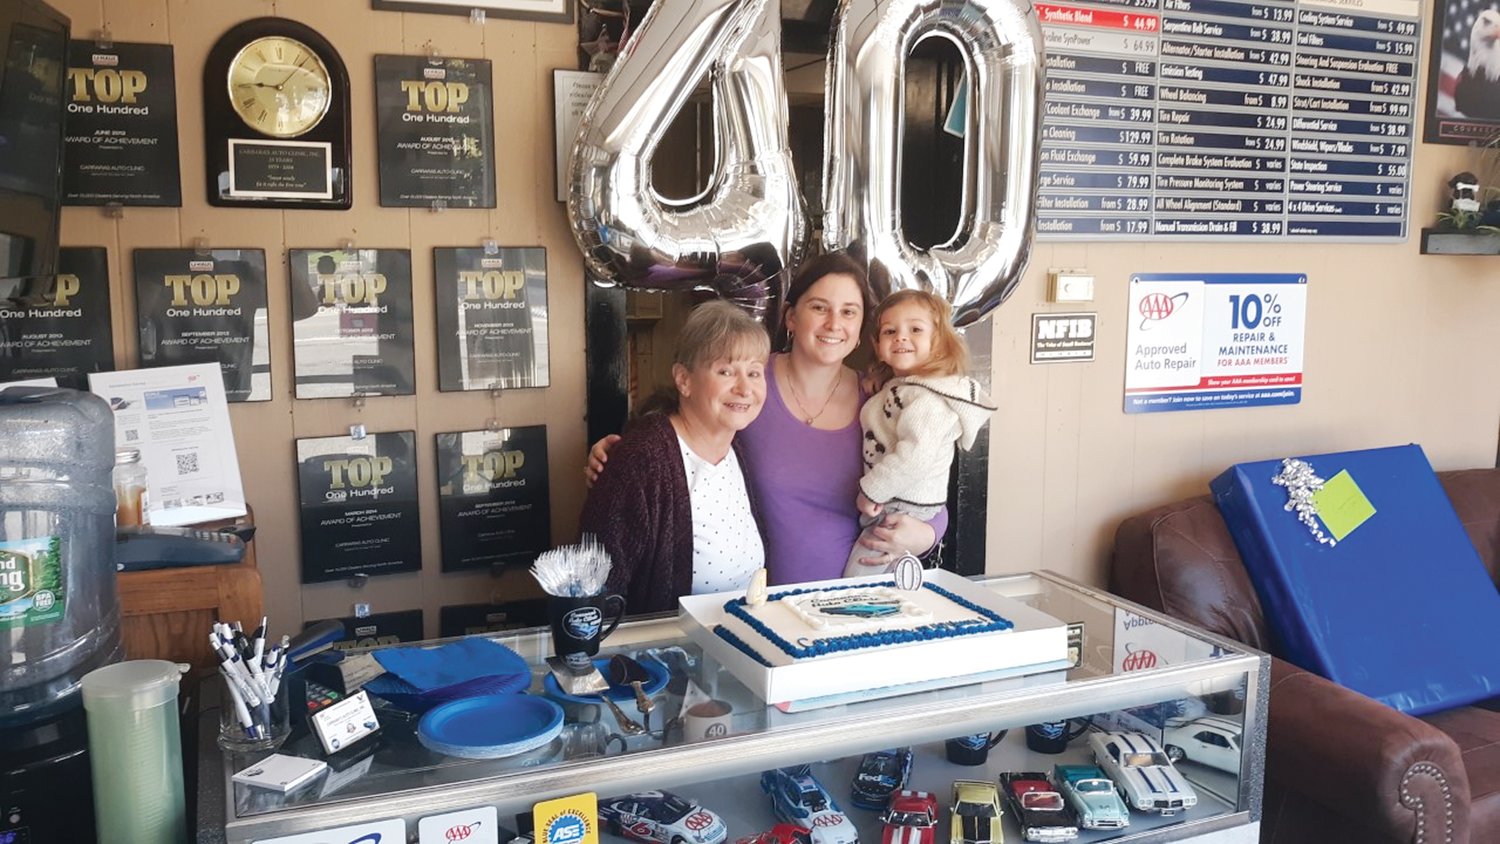 MANY CELEBRATIONS: June Carrara (Dave’s wife), stands with her daughter-in-law Michelle Carrara, and grandson Diamantino to celebrate the 40th Anniversary of Carrara’s Auto Clinic on  Oct. 15, 2019.